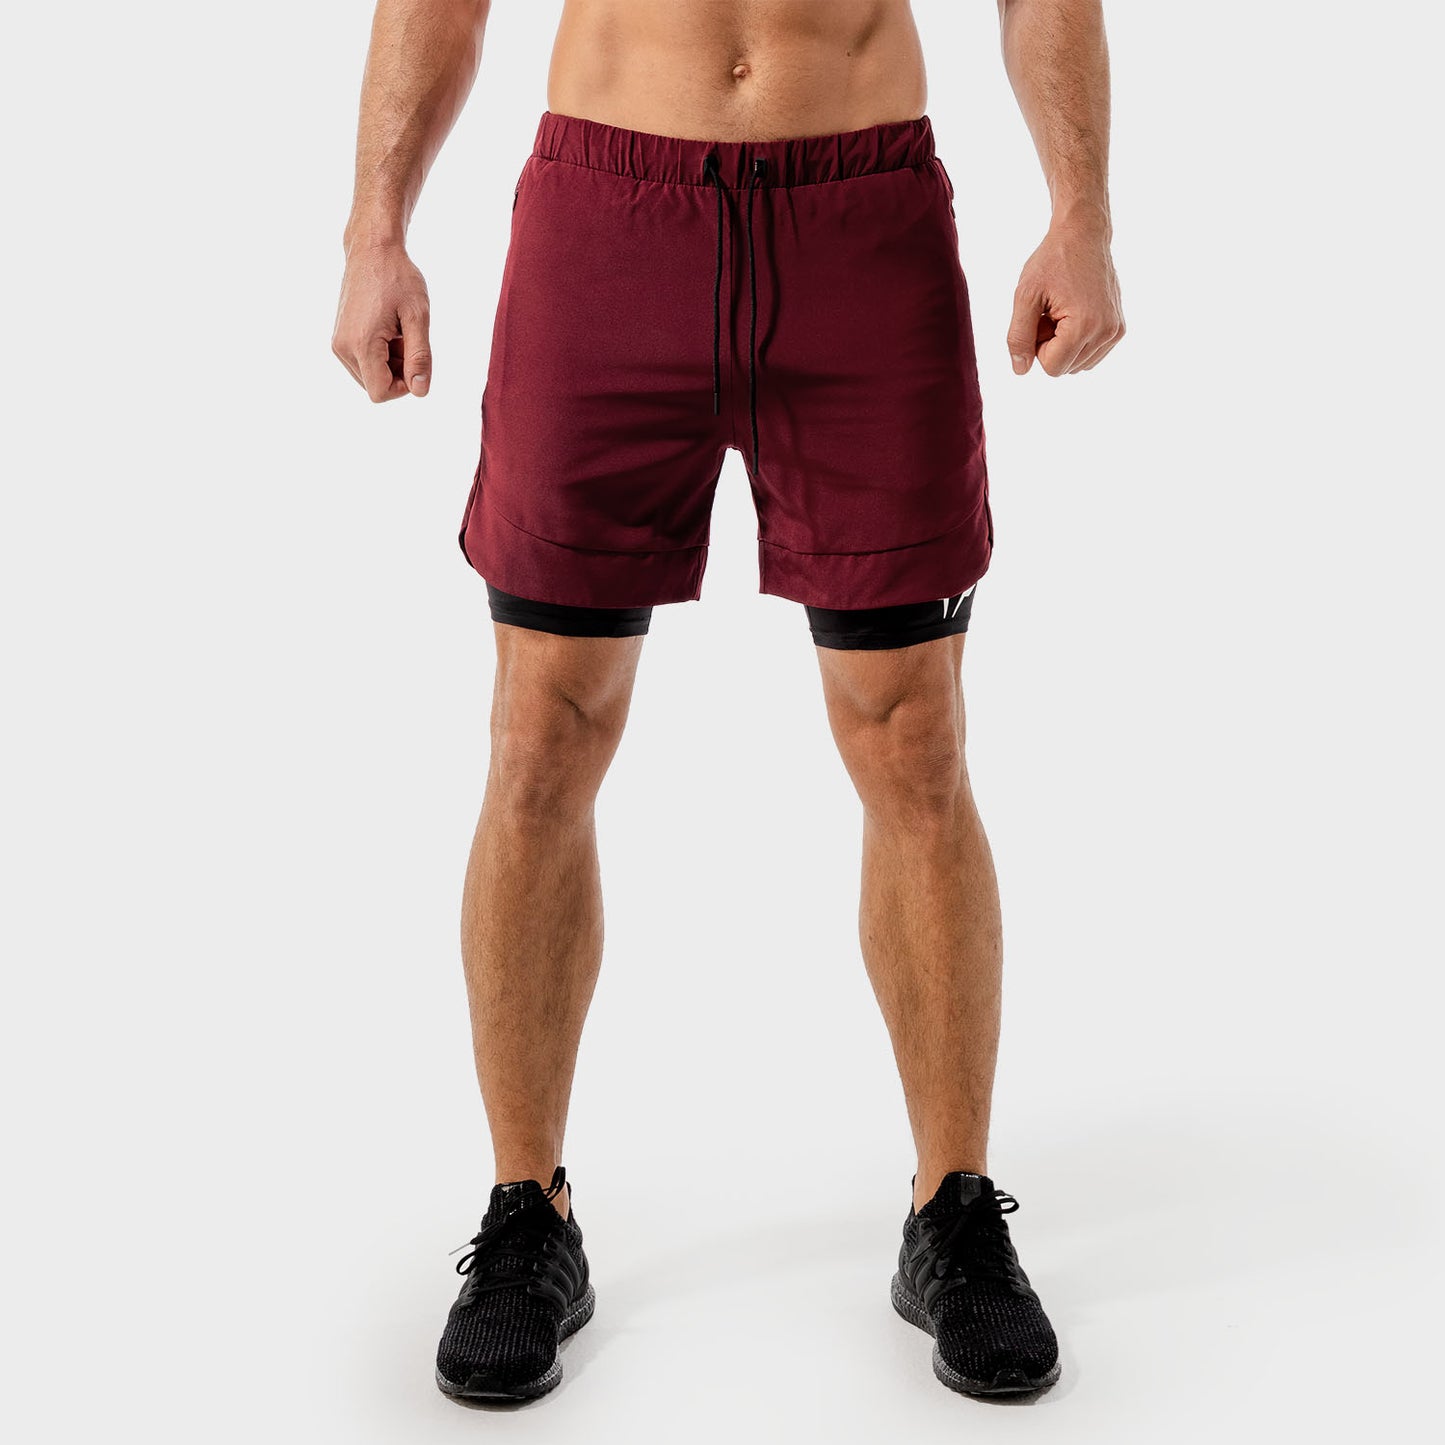 AE, Limitless 2-in-1 Shorts - Charcoal, Gym Shorts Men